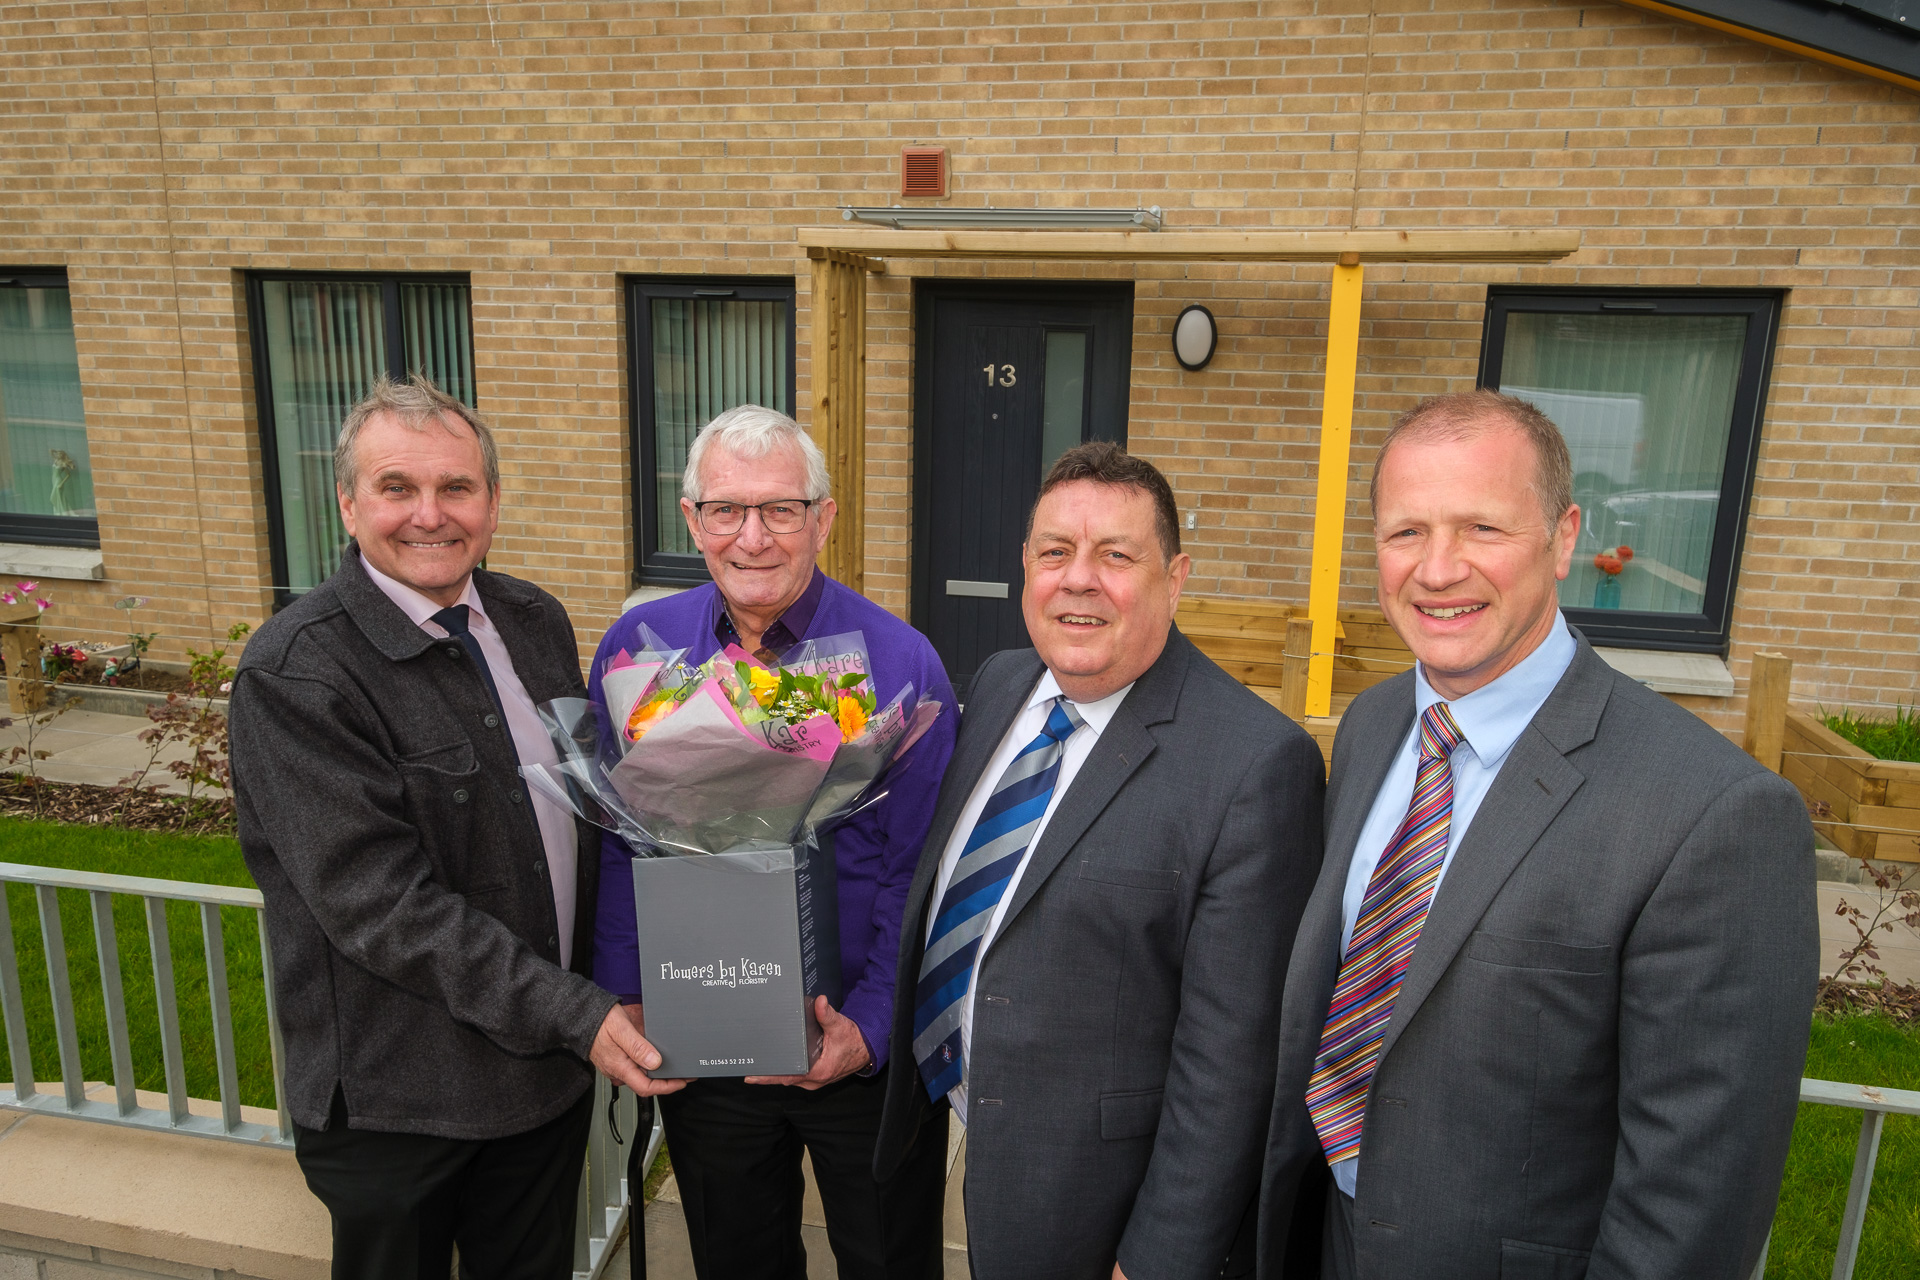 Welcome mat rolled out at new council homes in Kilmarnock